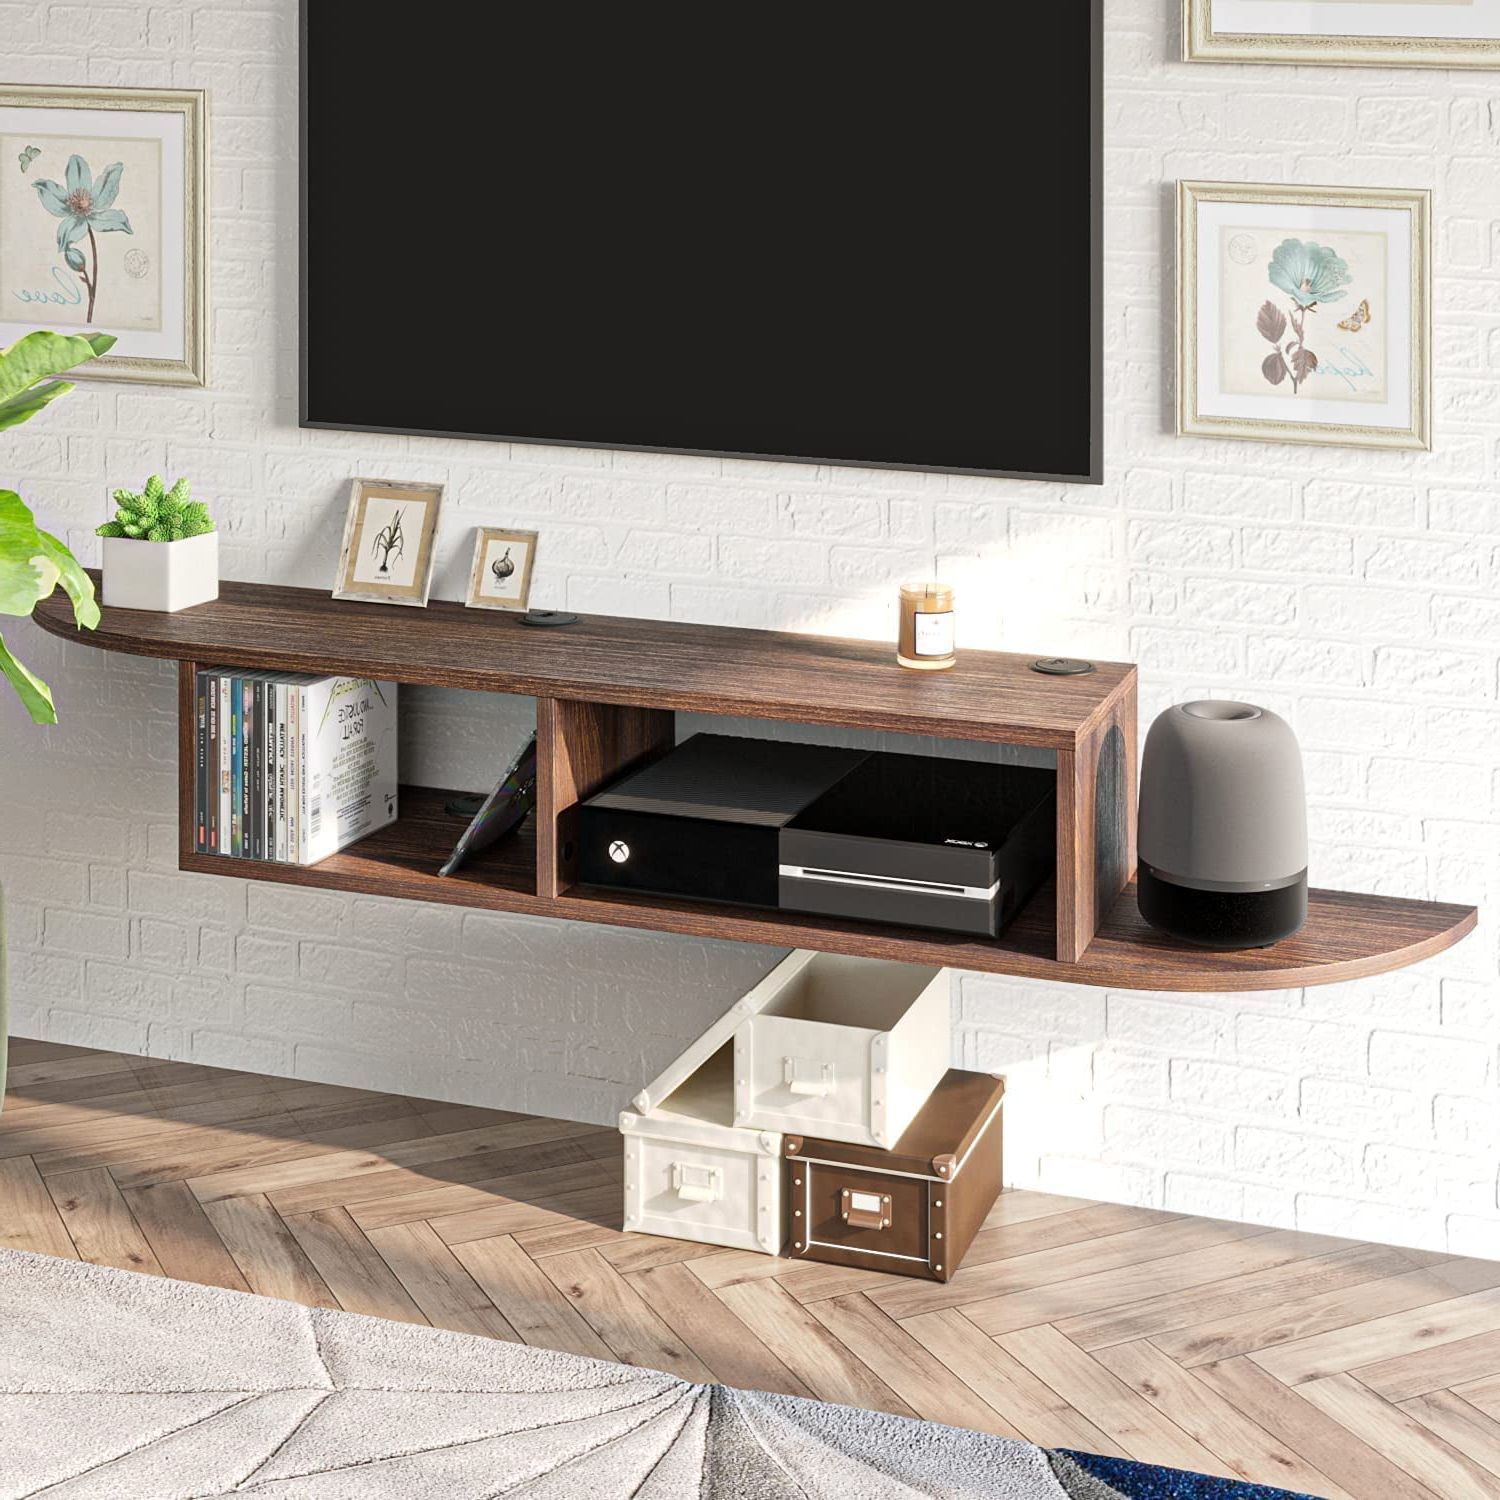 Floating Tv Stand, White Floating Tv Shelf, Wall Mounted Media Console  Entertainment Center For 55 Inch Tv, Storage Cabinet Under Tv, Walnut –  Walmart Intended For Wall Mounted Floating Tv Stands (View 14 of 20)